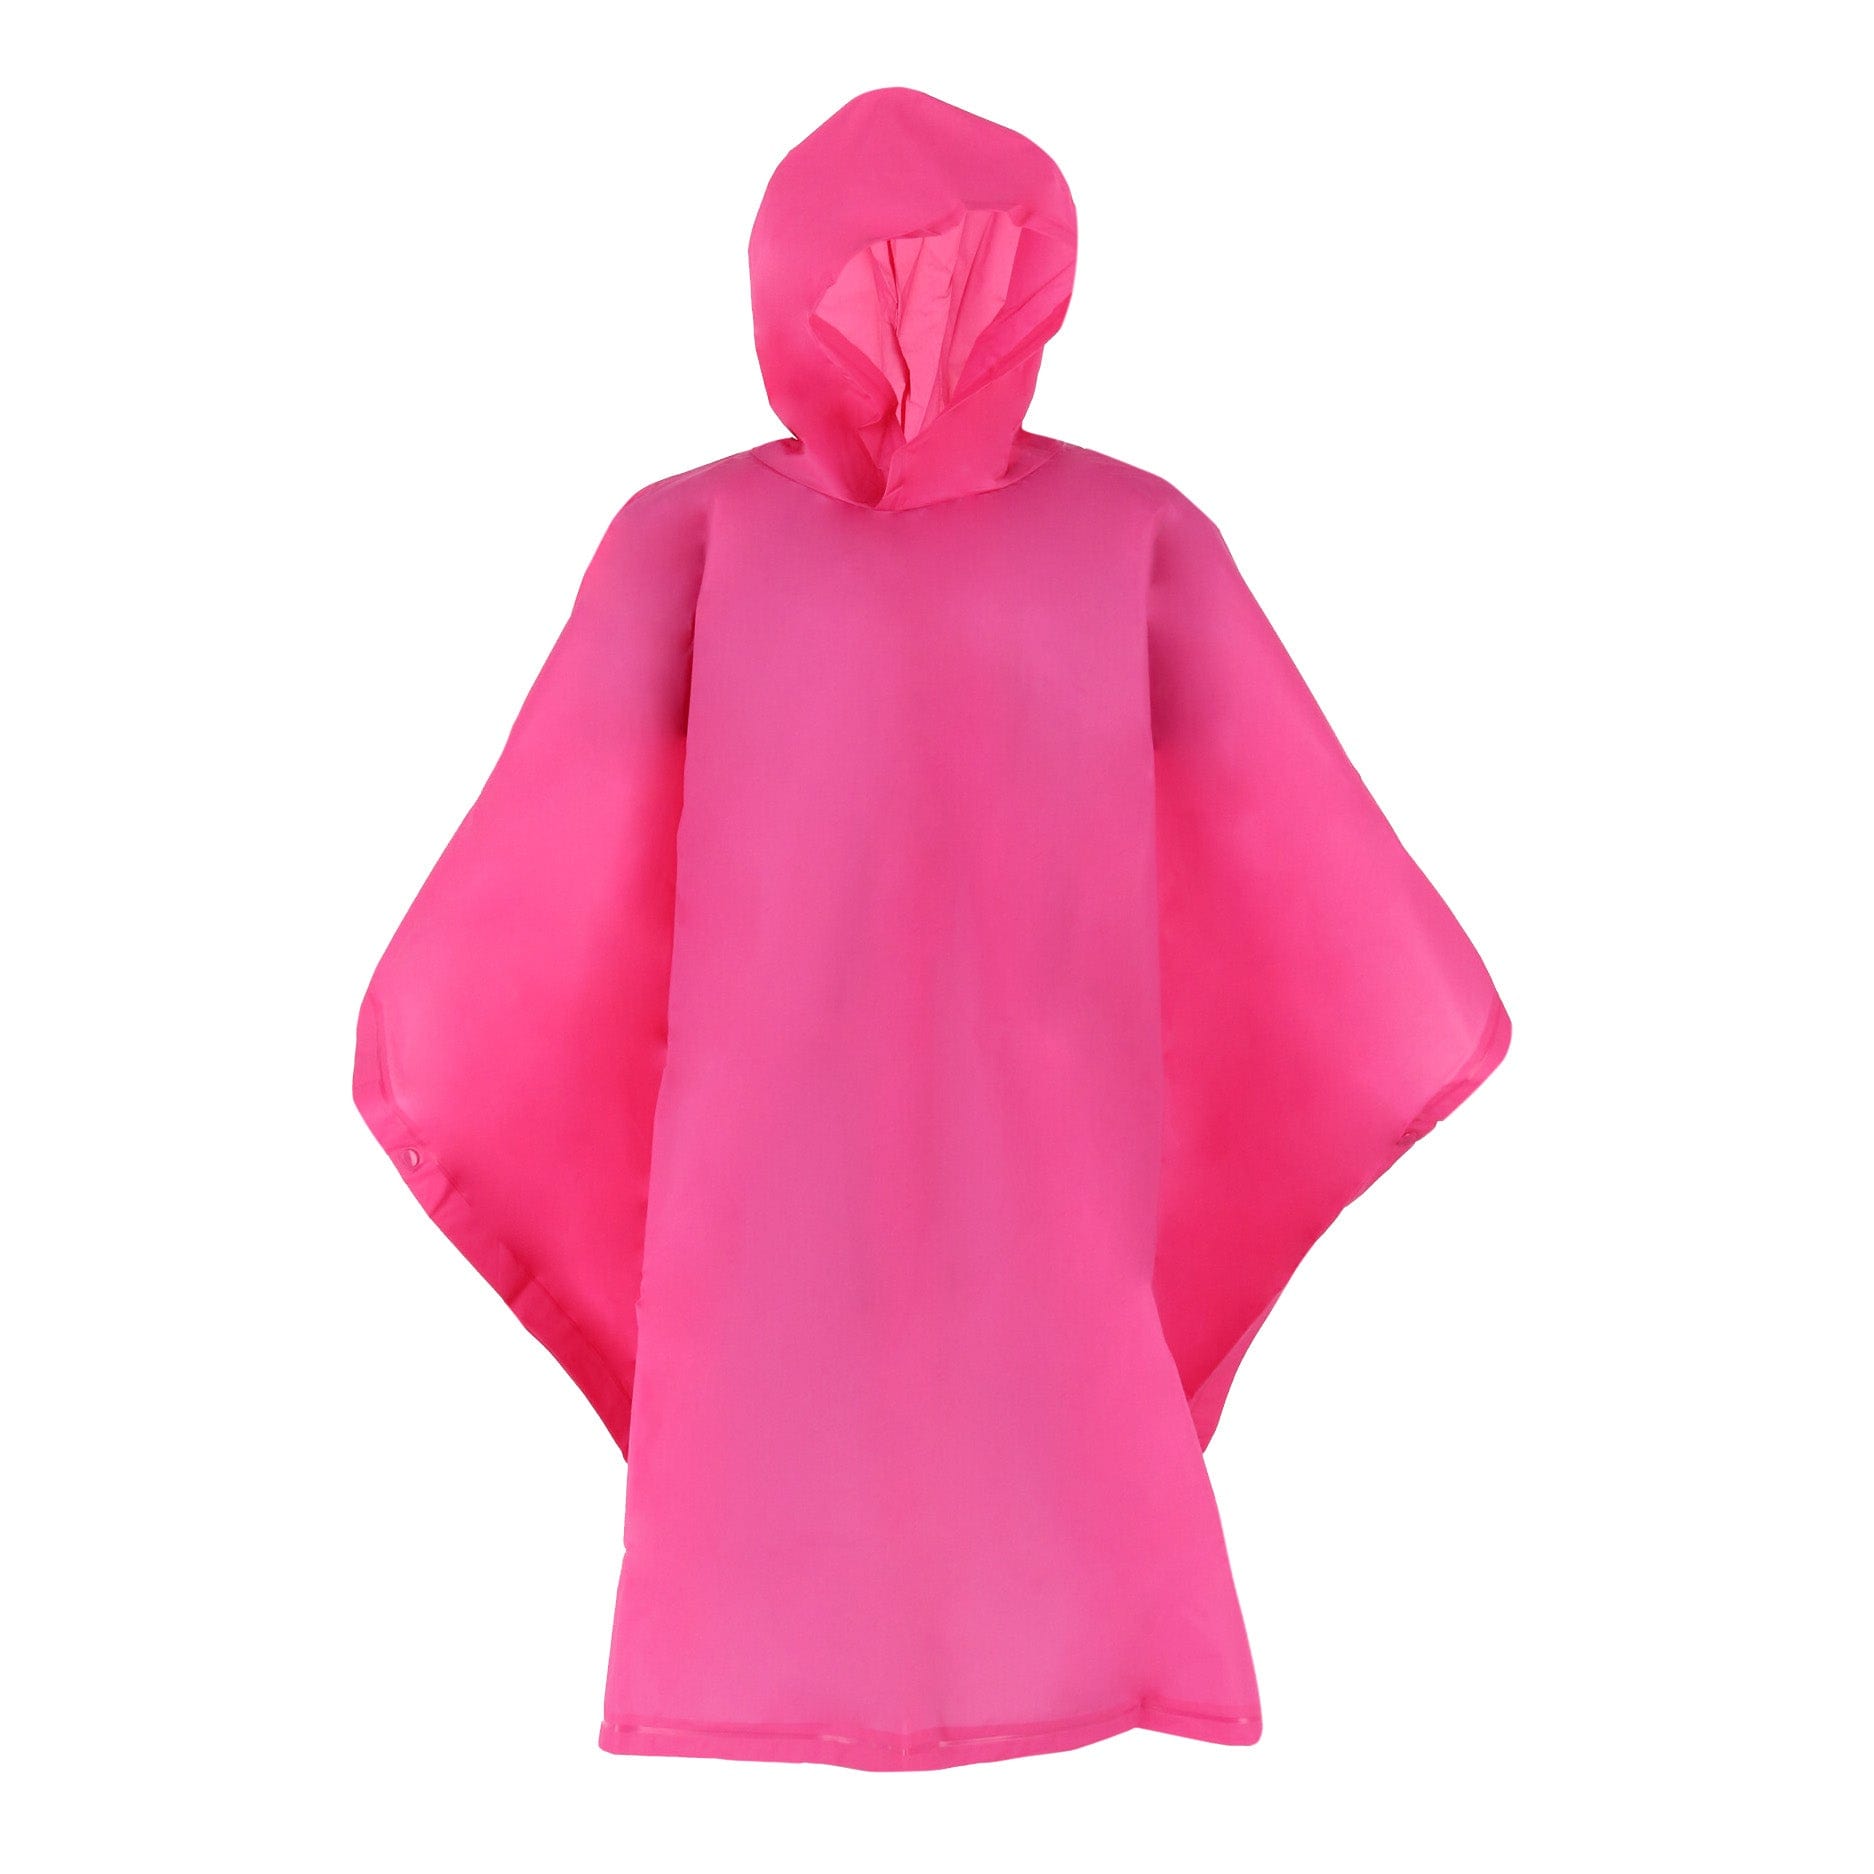 Raincoat women hooded, Clear Rain jacket, Poncho, Small. Mexican style